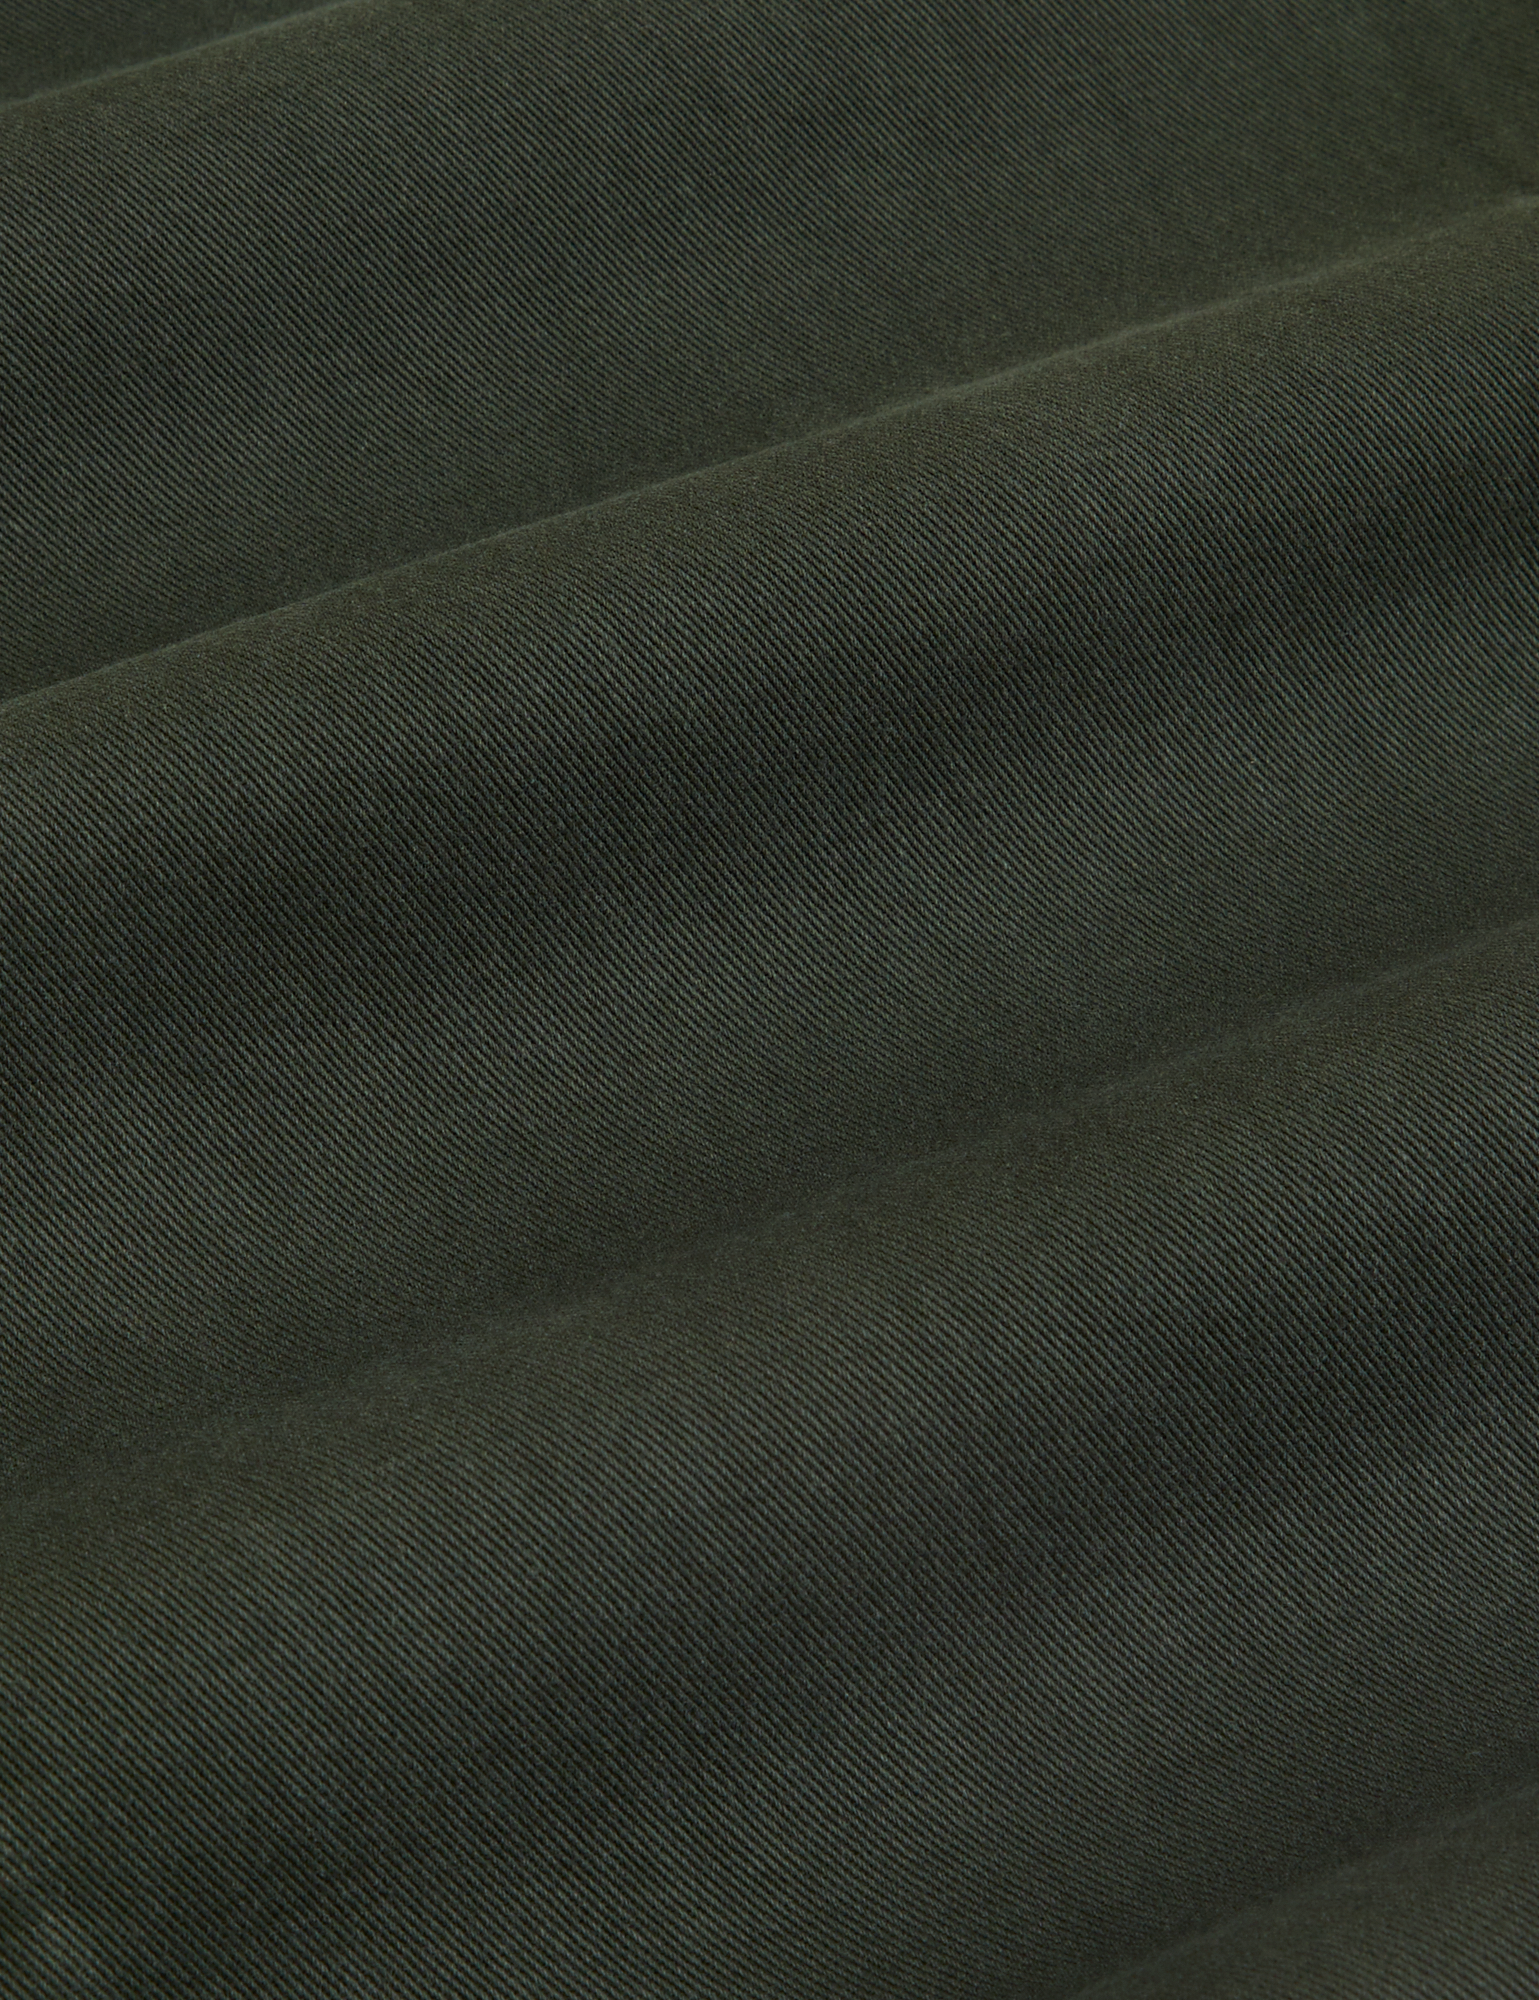 Heavyweight Trousers in Swamp Green fabric detail close up